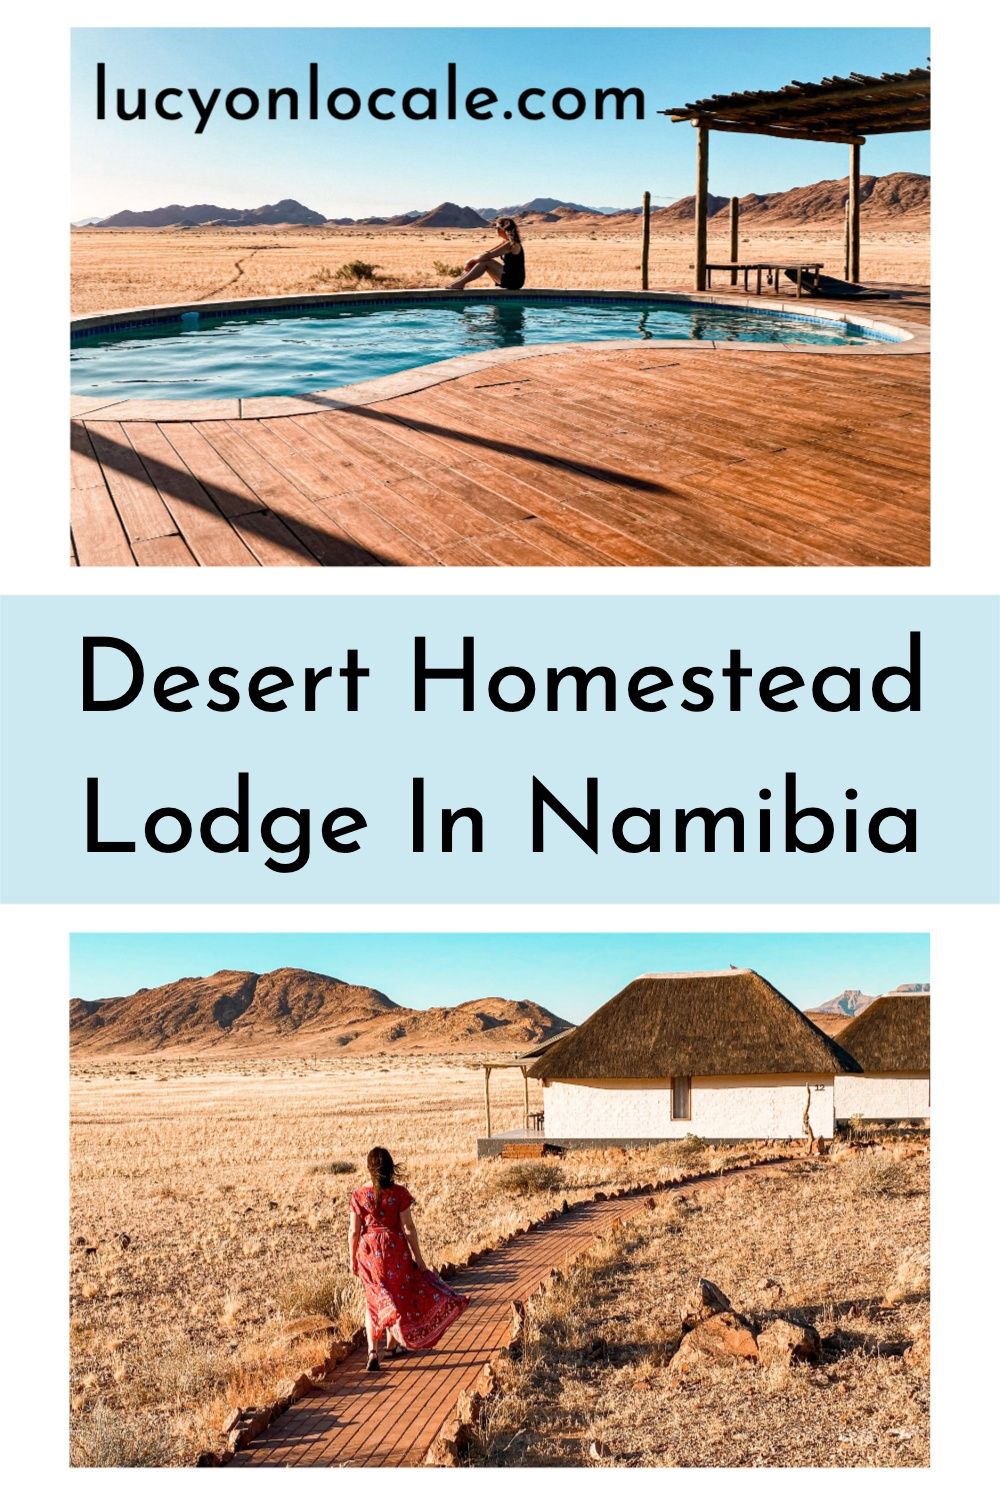 staying at Desert Homestead Lodge in Namibia